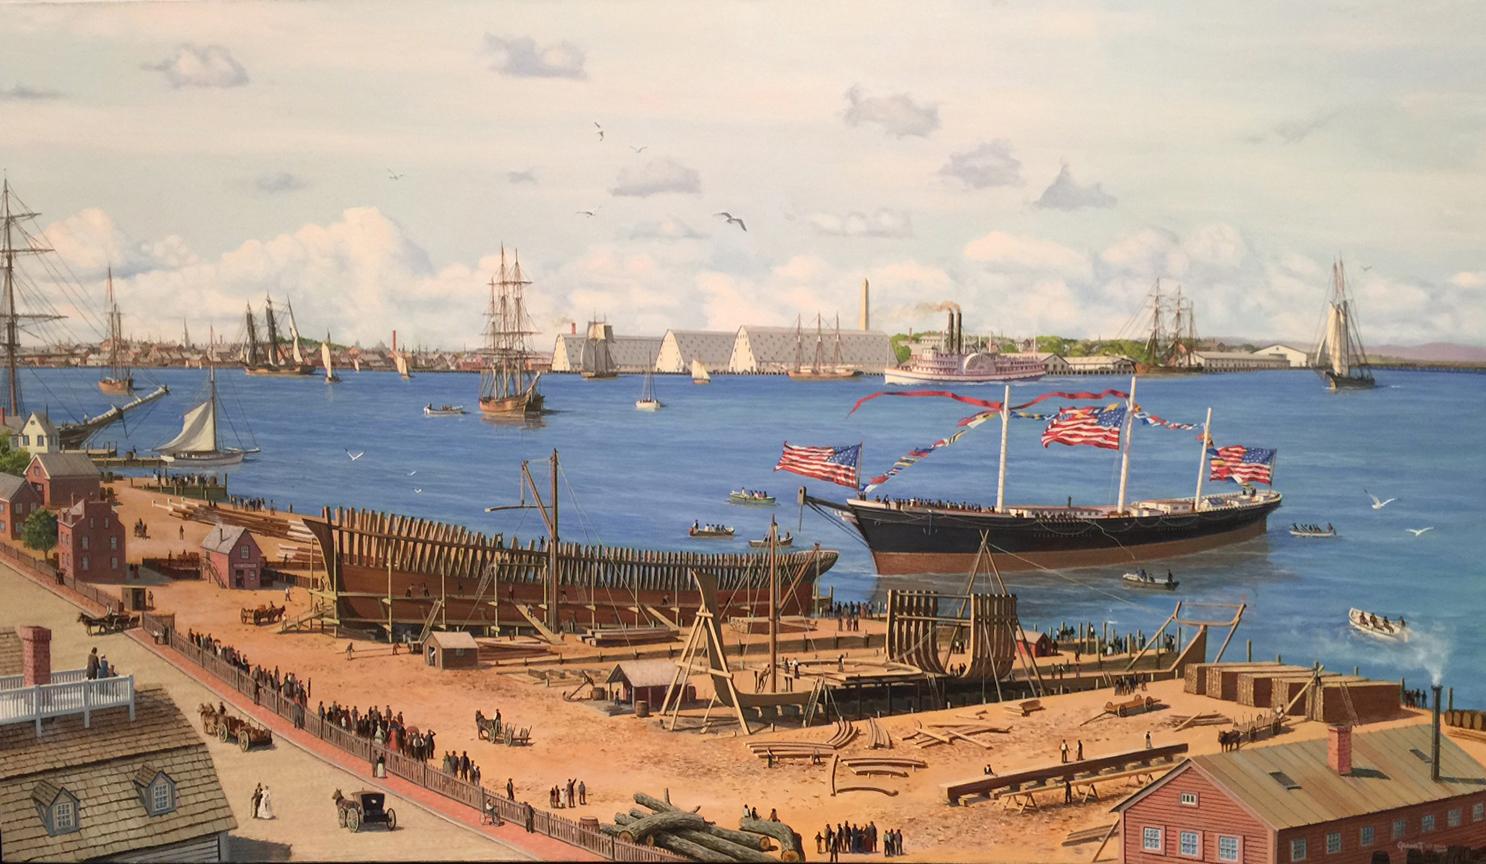 Paul Garnett Landscape Painting - McKay's Ship Yard- The Launching of Clippership "Flying Cloud" in 1851